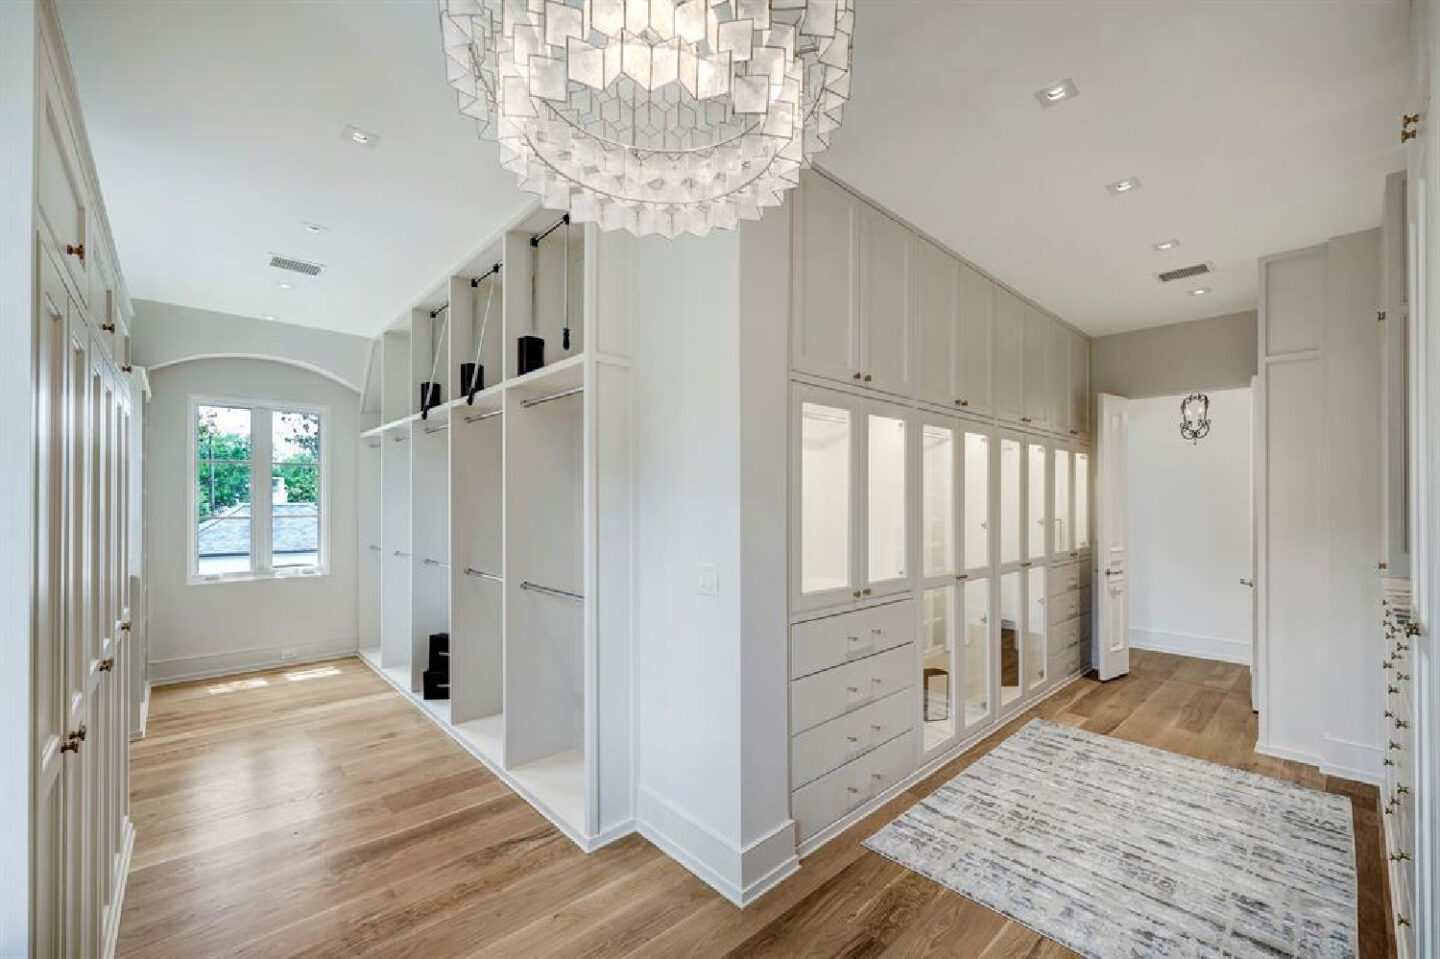 Bespoke closet design in Stone floor in 2445 Pine Valley Ct., Houston - Jennifer Hamelet of Mirador Builders; European style and interiors with reclaimed materials from Chateau Domingue. #europeanmanor #oldworldstyle